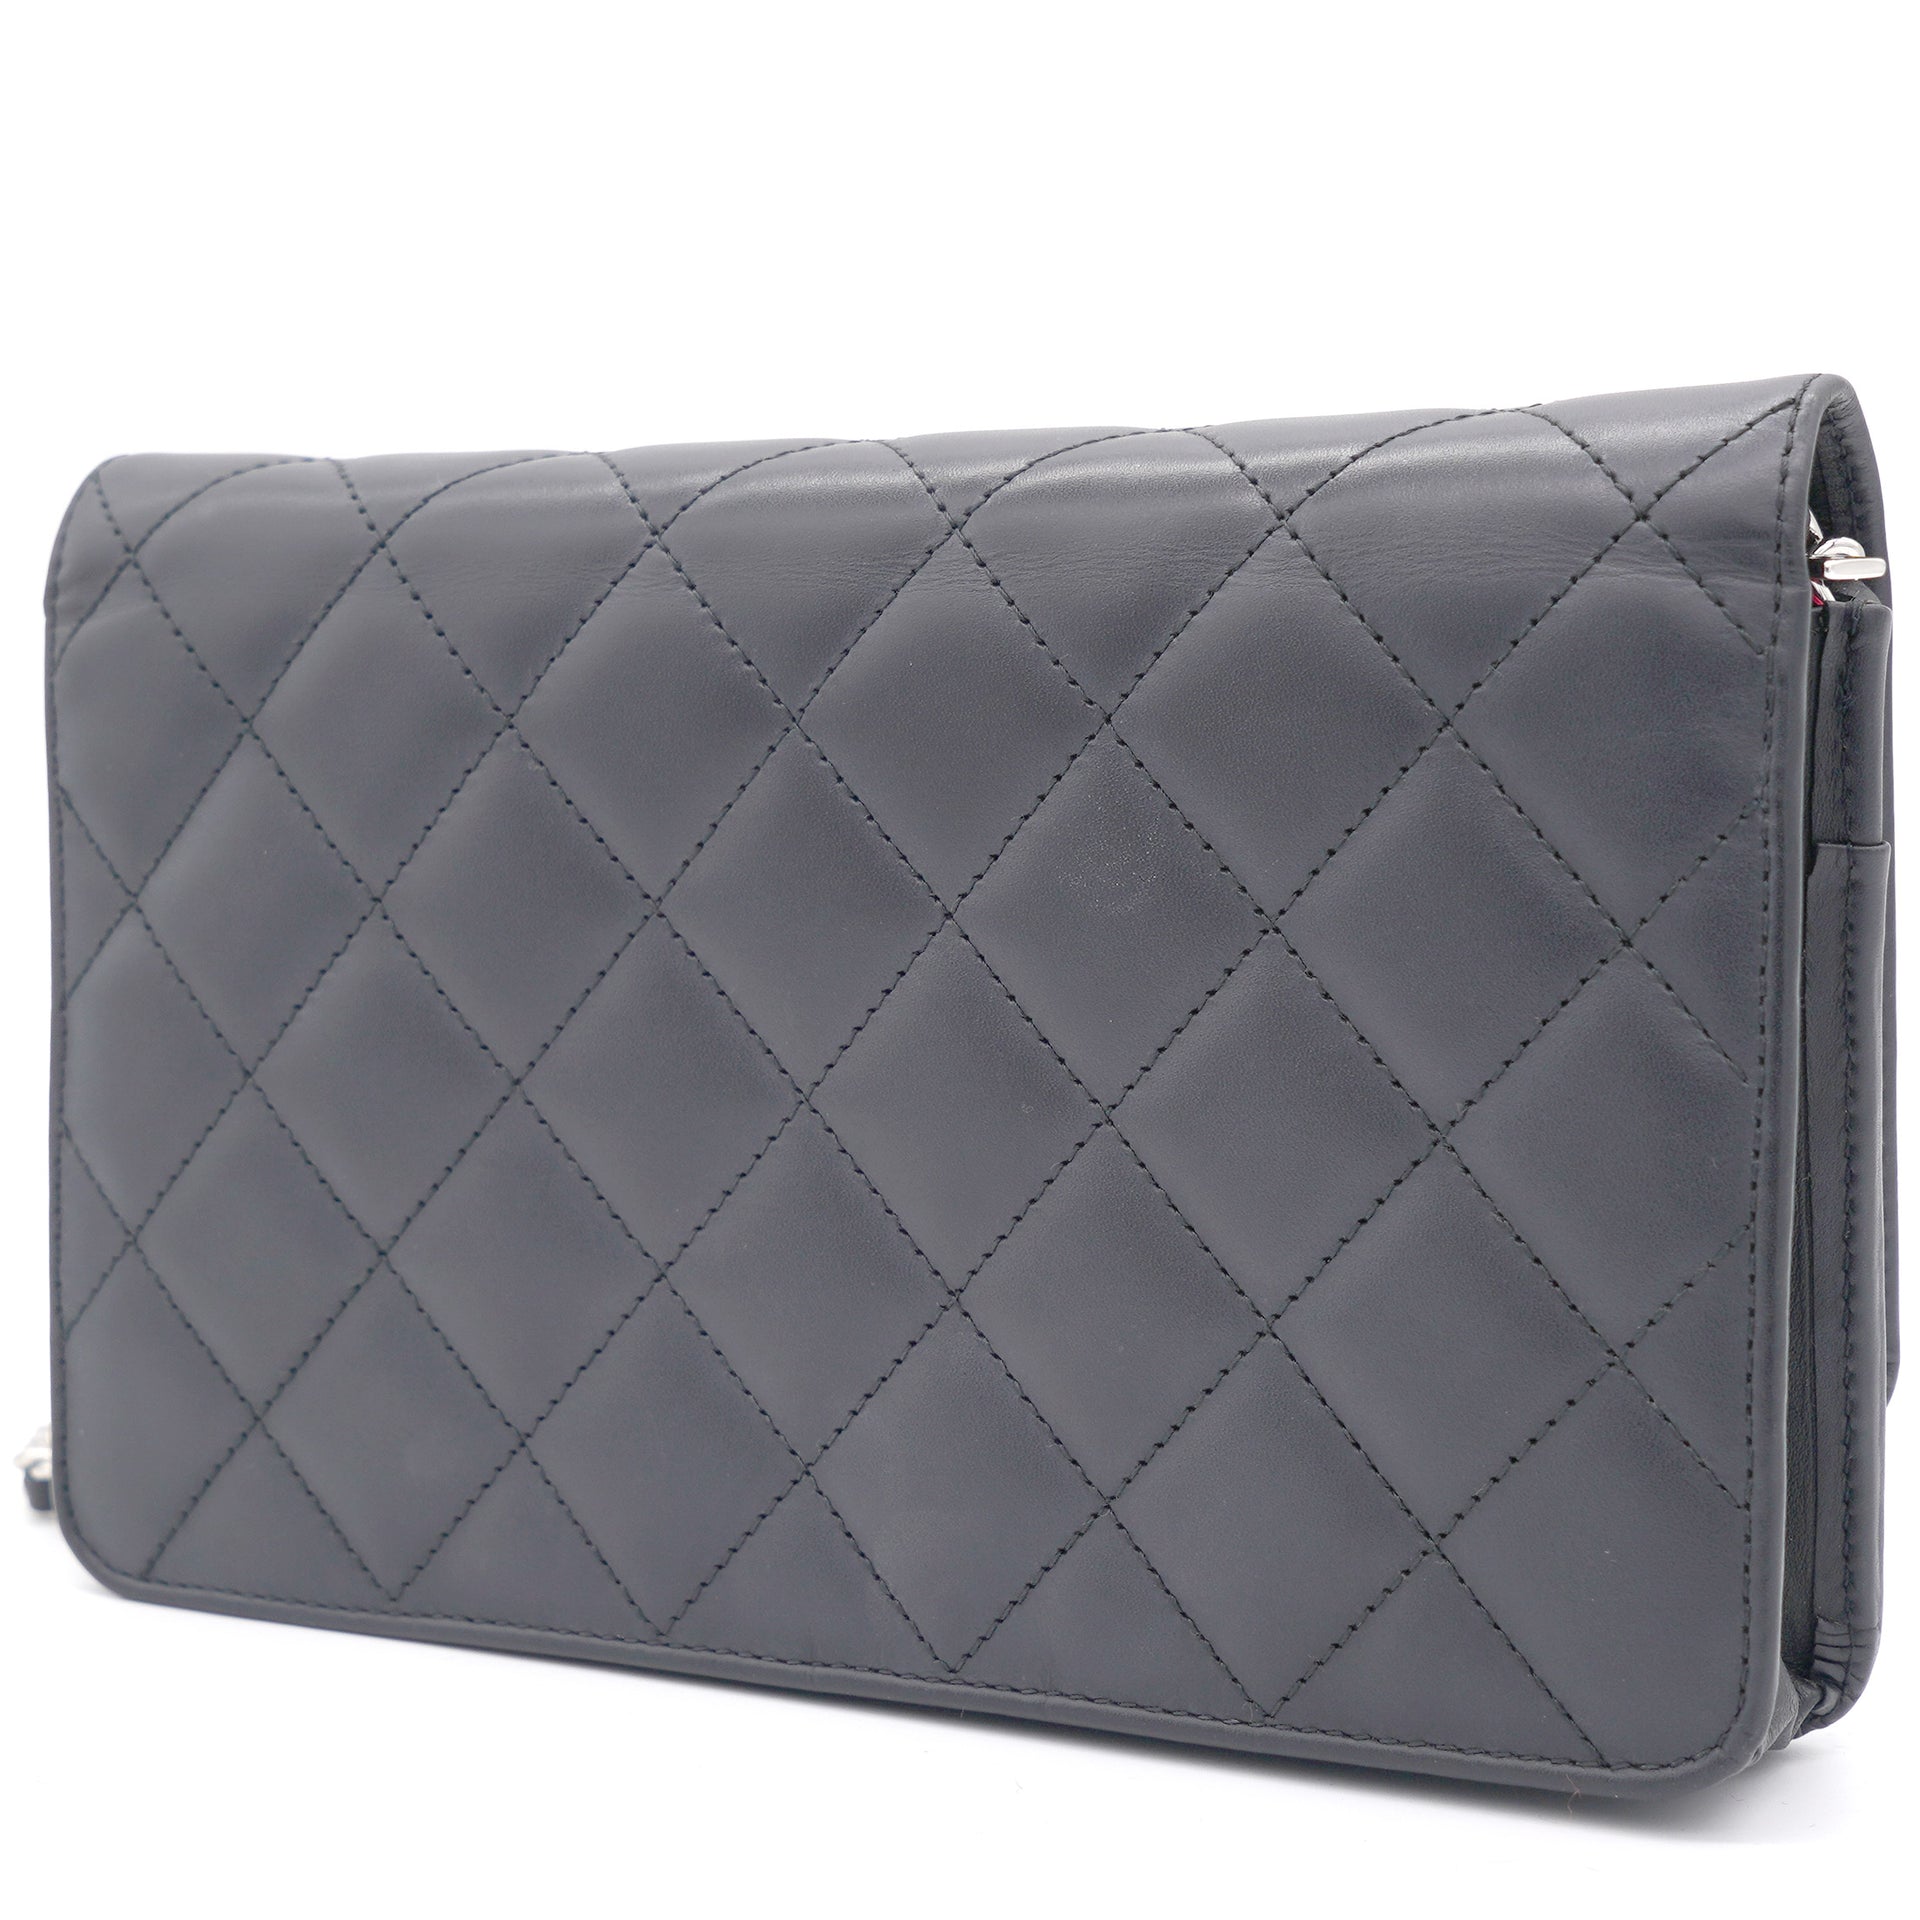 Black Quilted Leather Cambon Ligne Wallet on Chain